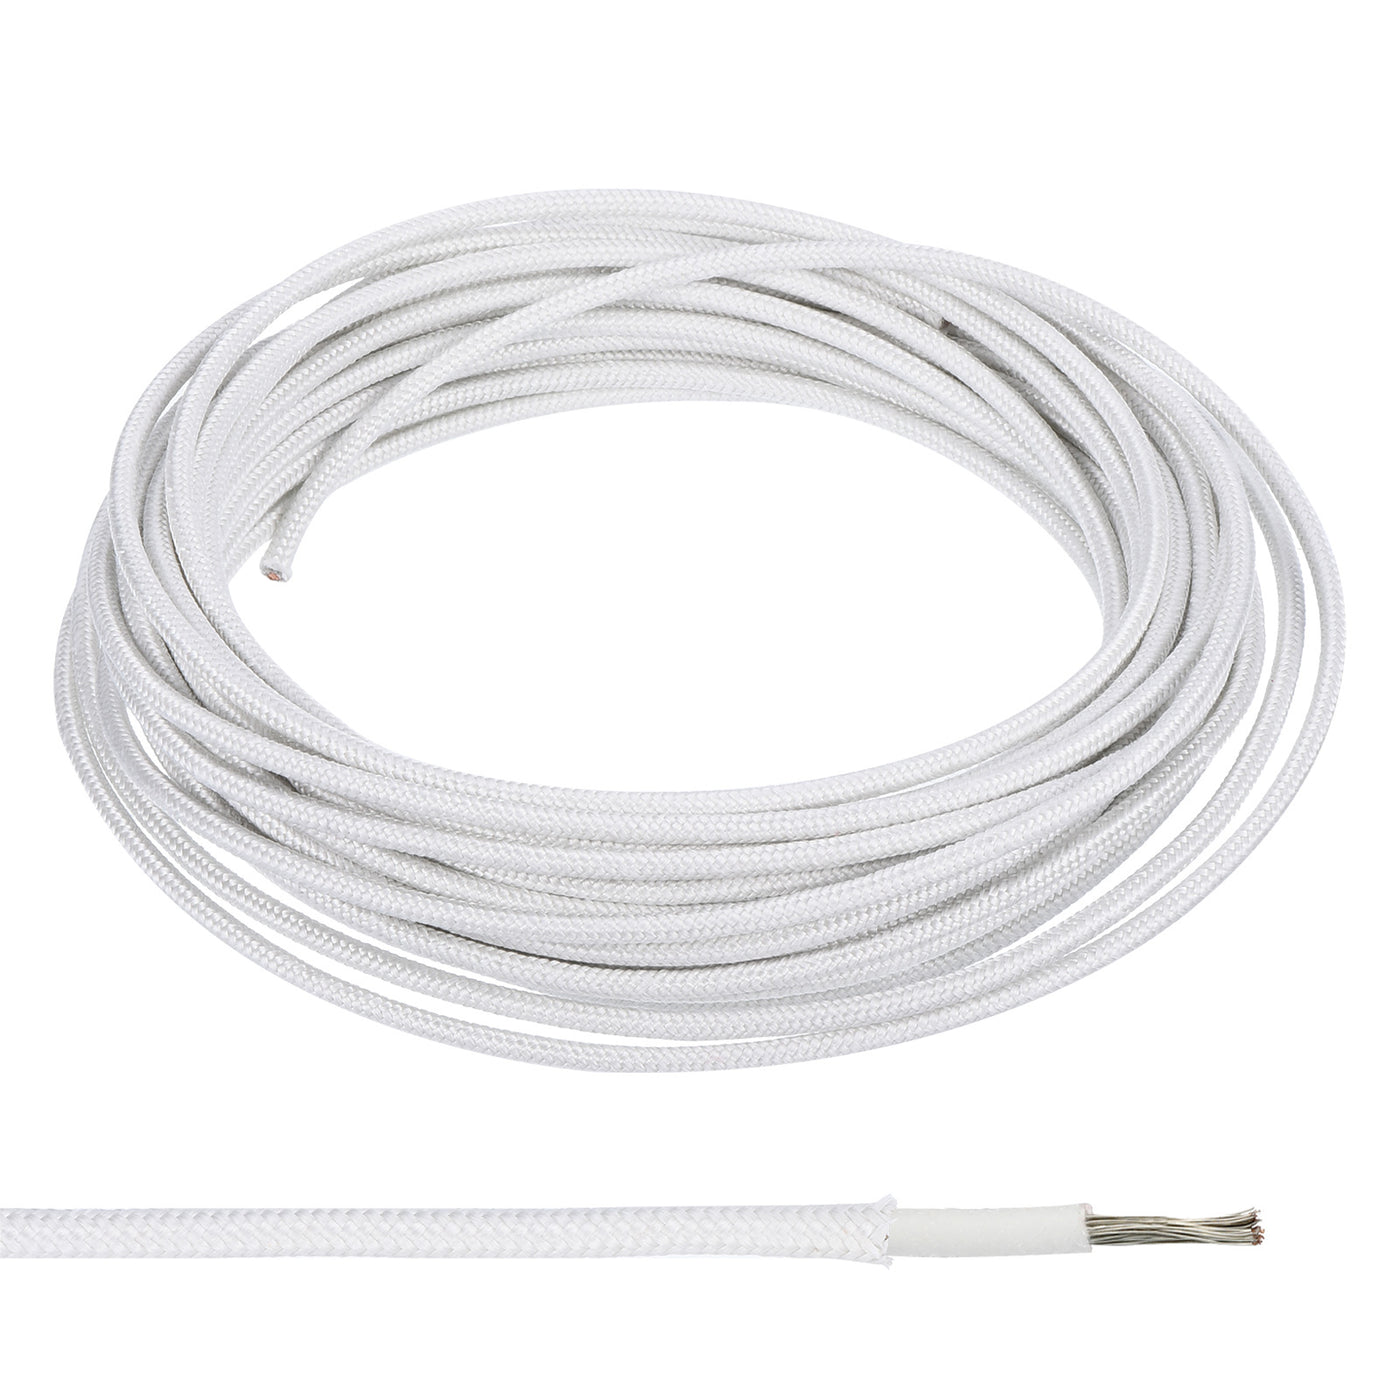 Harfington 9.8Ft 15AWG Electronic Wire, -30 to 200 Degree Celsius Insulated High Temperature Resistant Electrical Flexible Silicone Cable, White